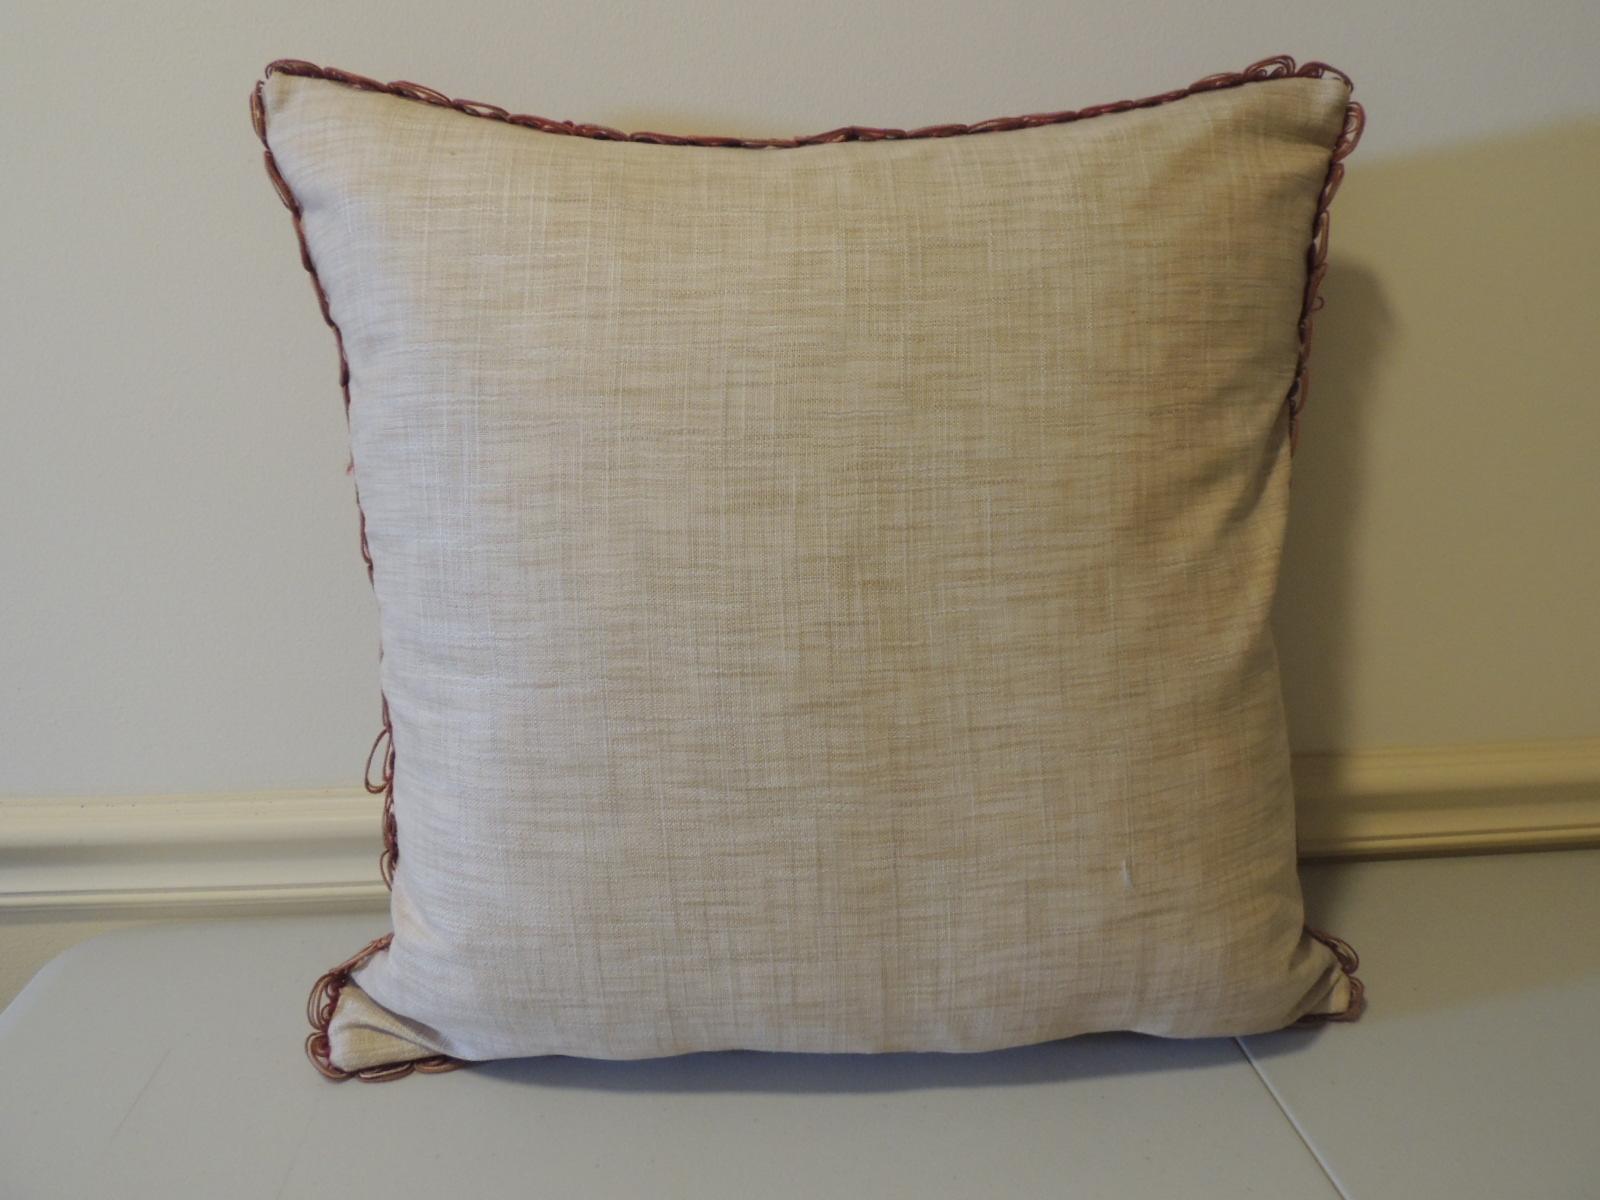 French Pink Vintage Aubusson Square Decorative Pillow #2 For Sale